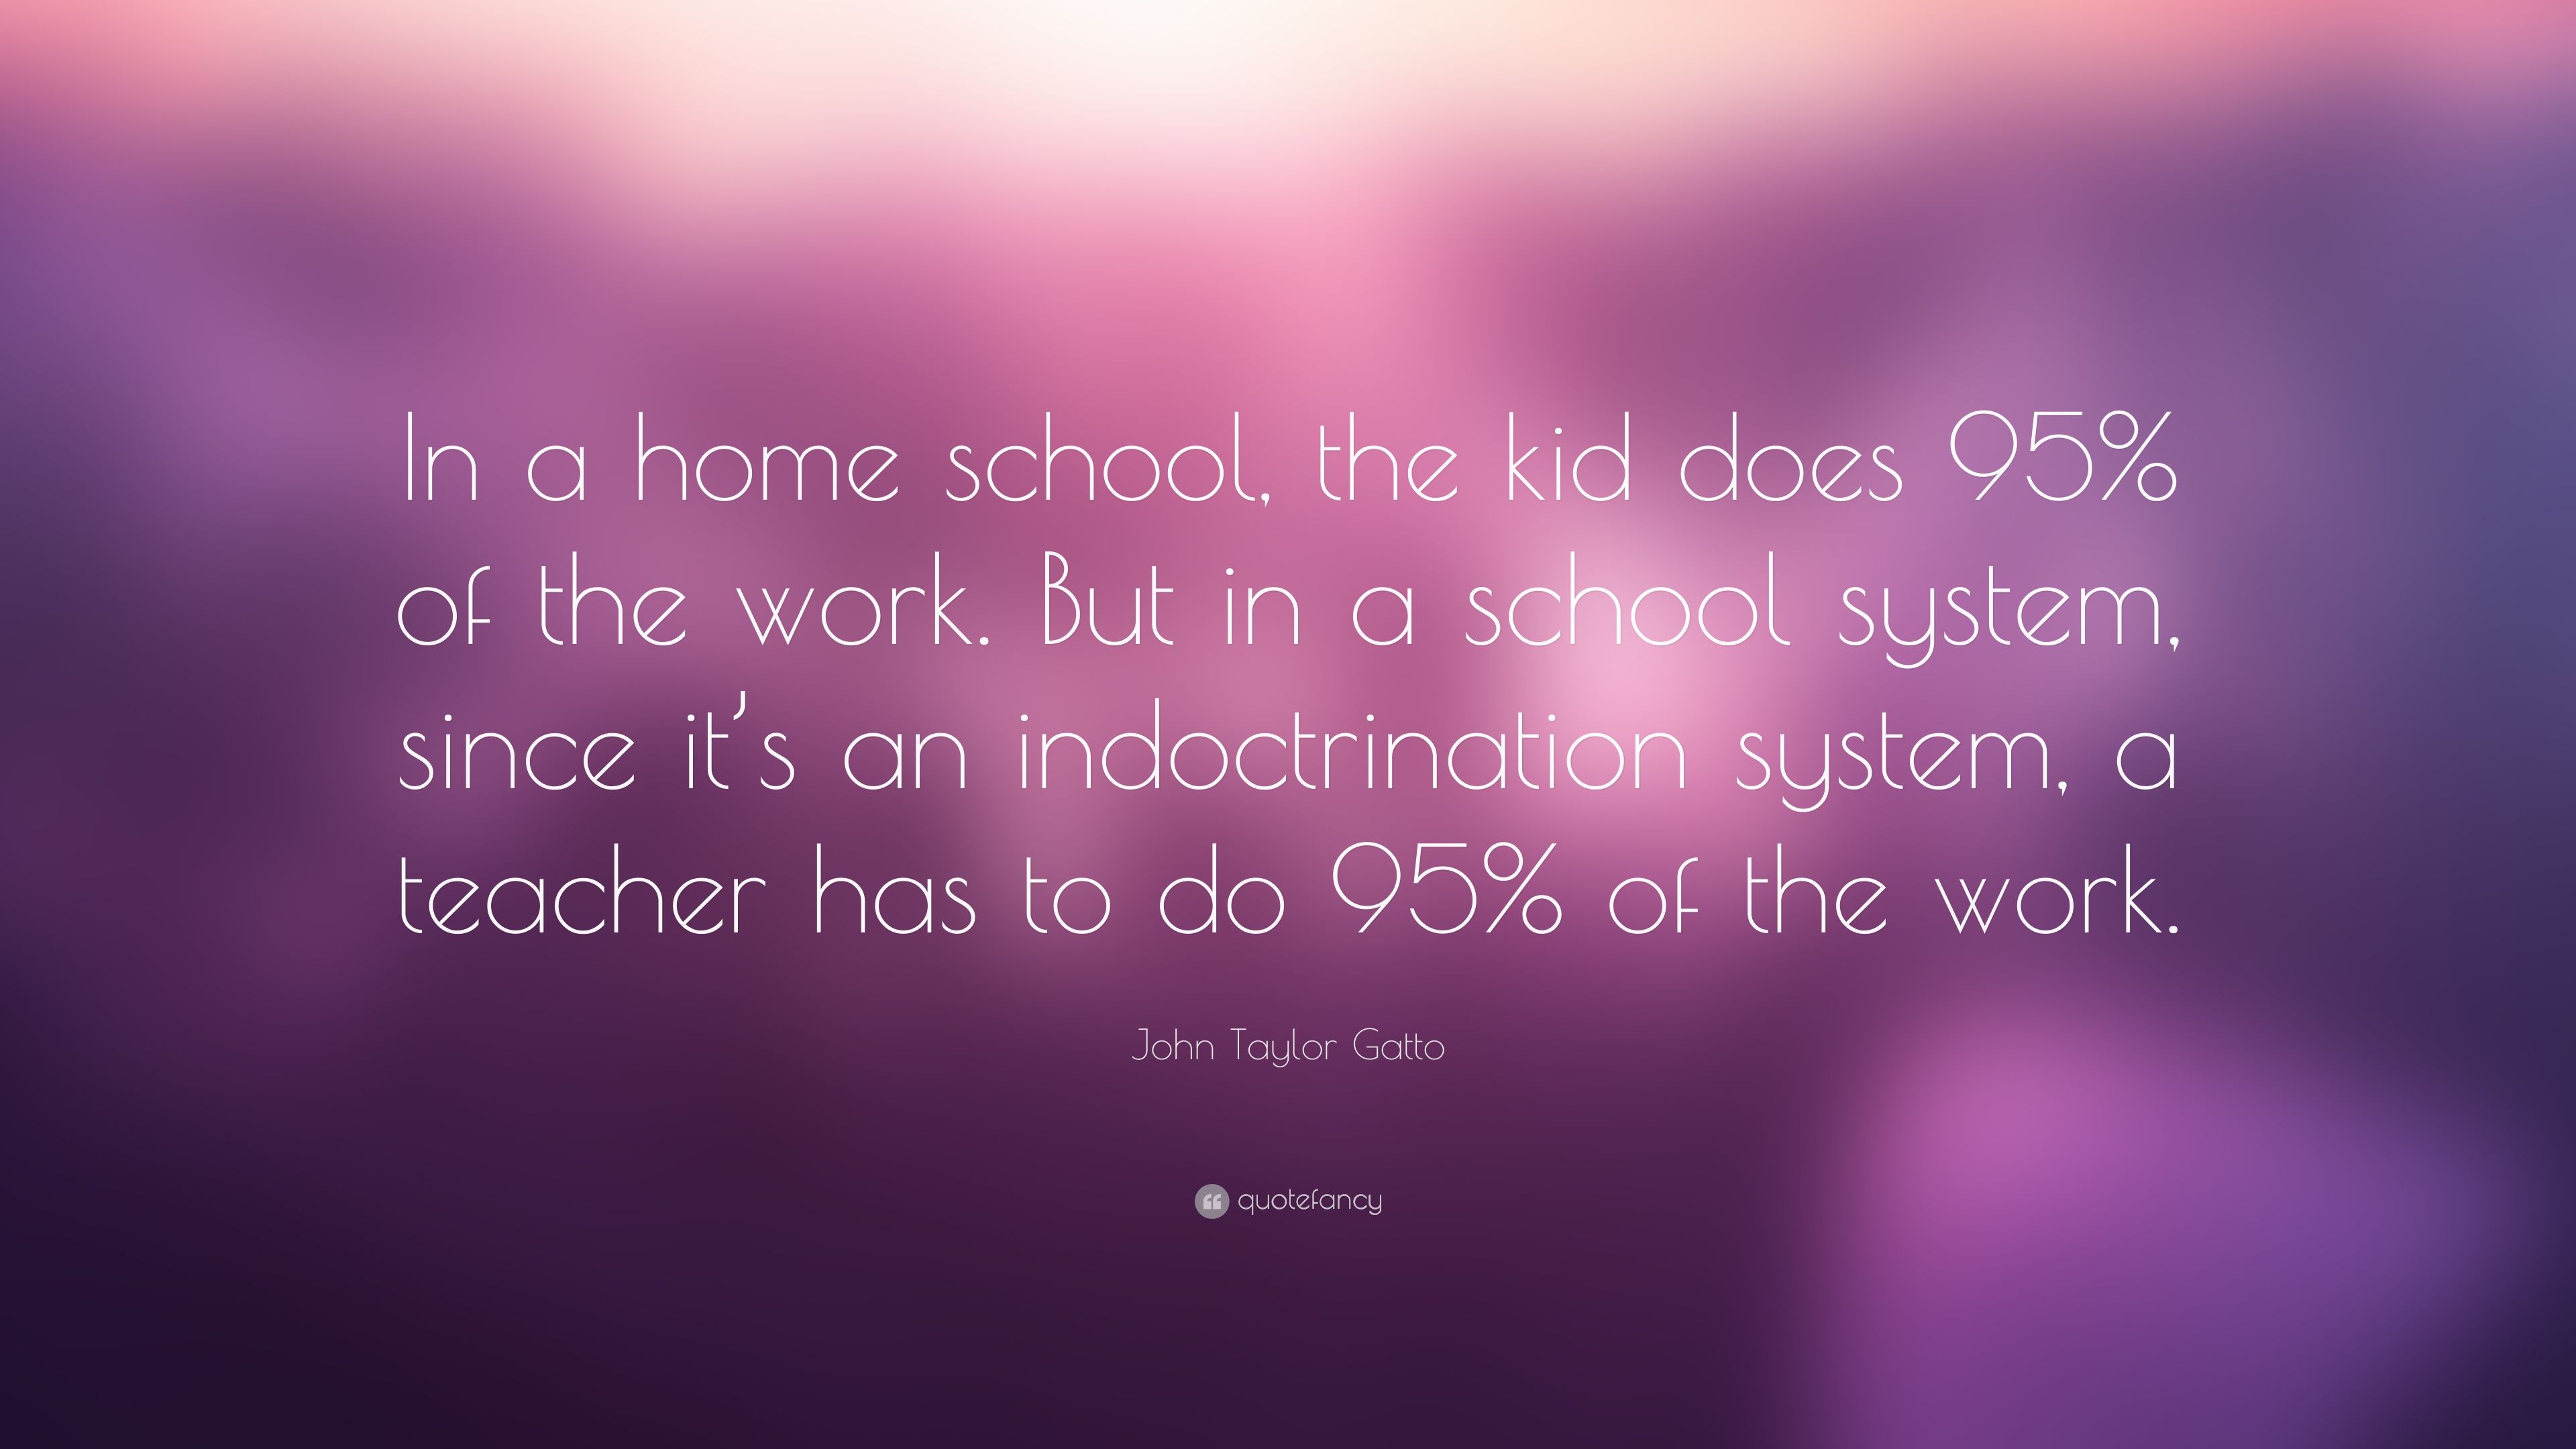 John Taylor Gatto Quote: “In a home school, the kid does 95%